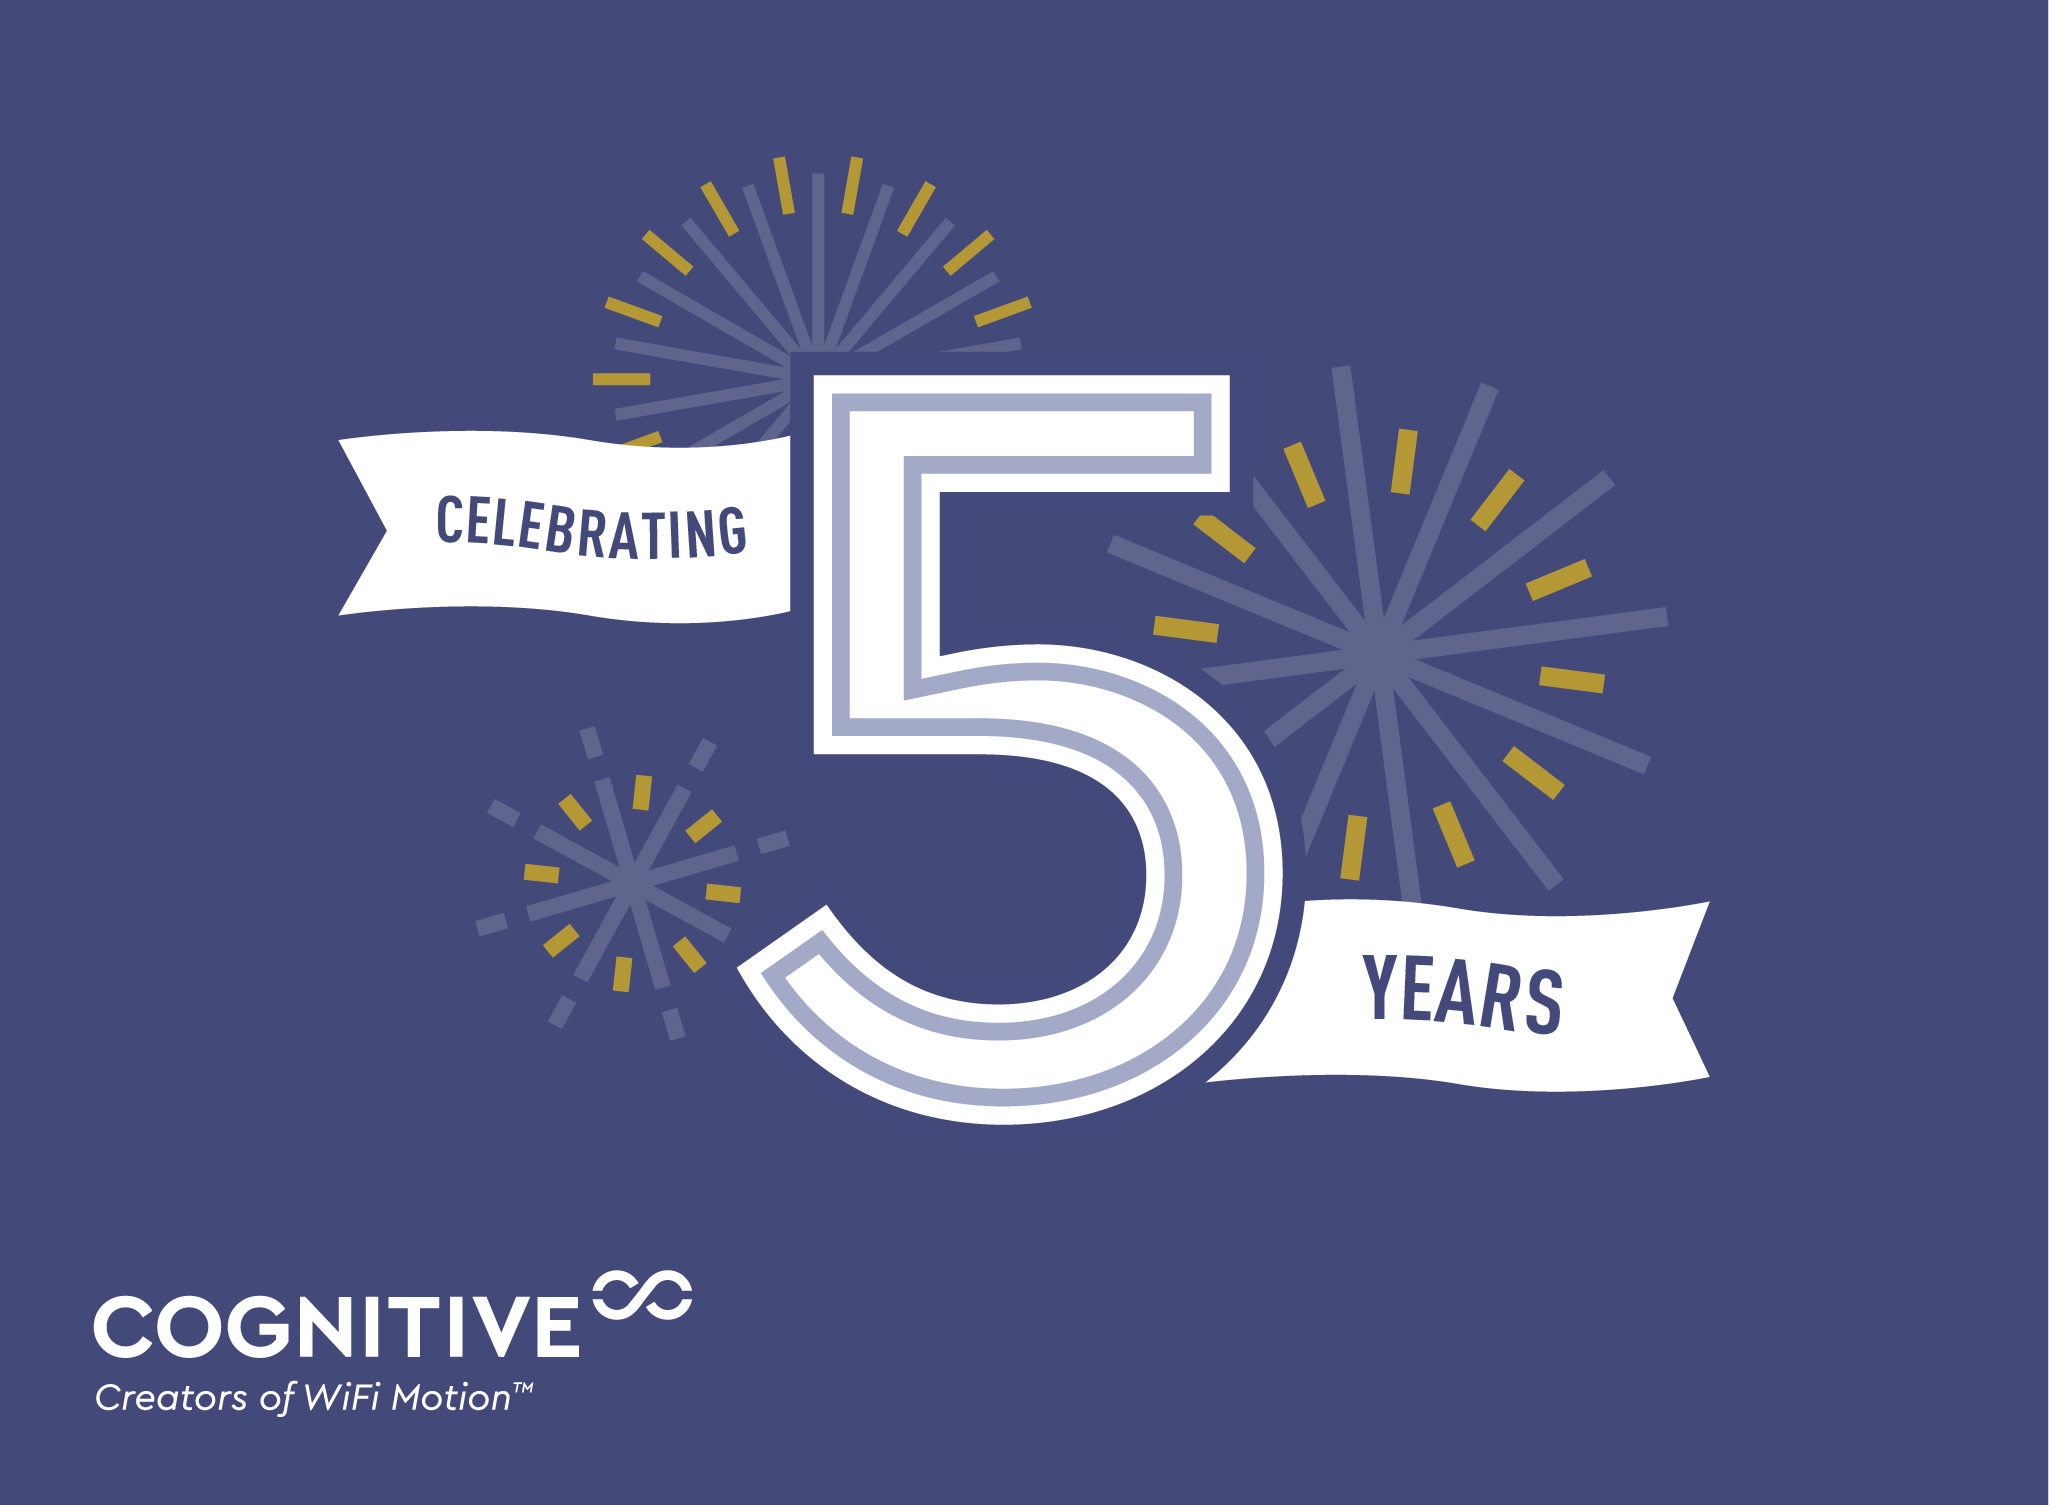 "Celebrating 5 Years, Cognitive Creators of WiFi Motion"